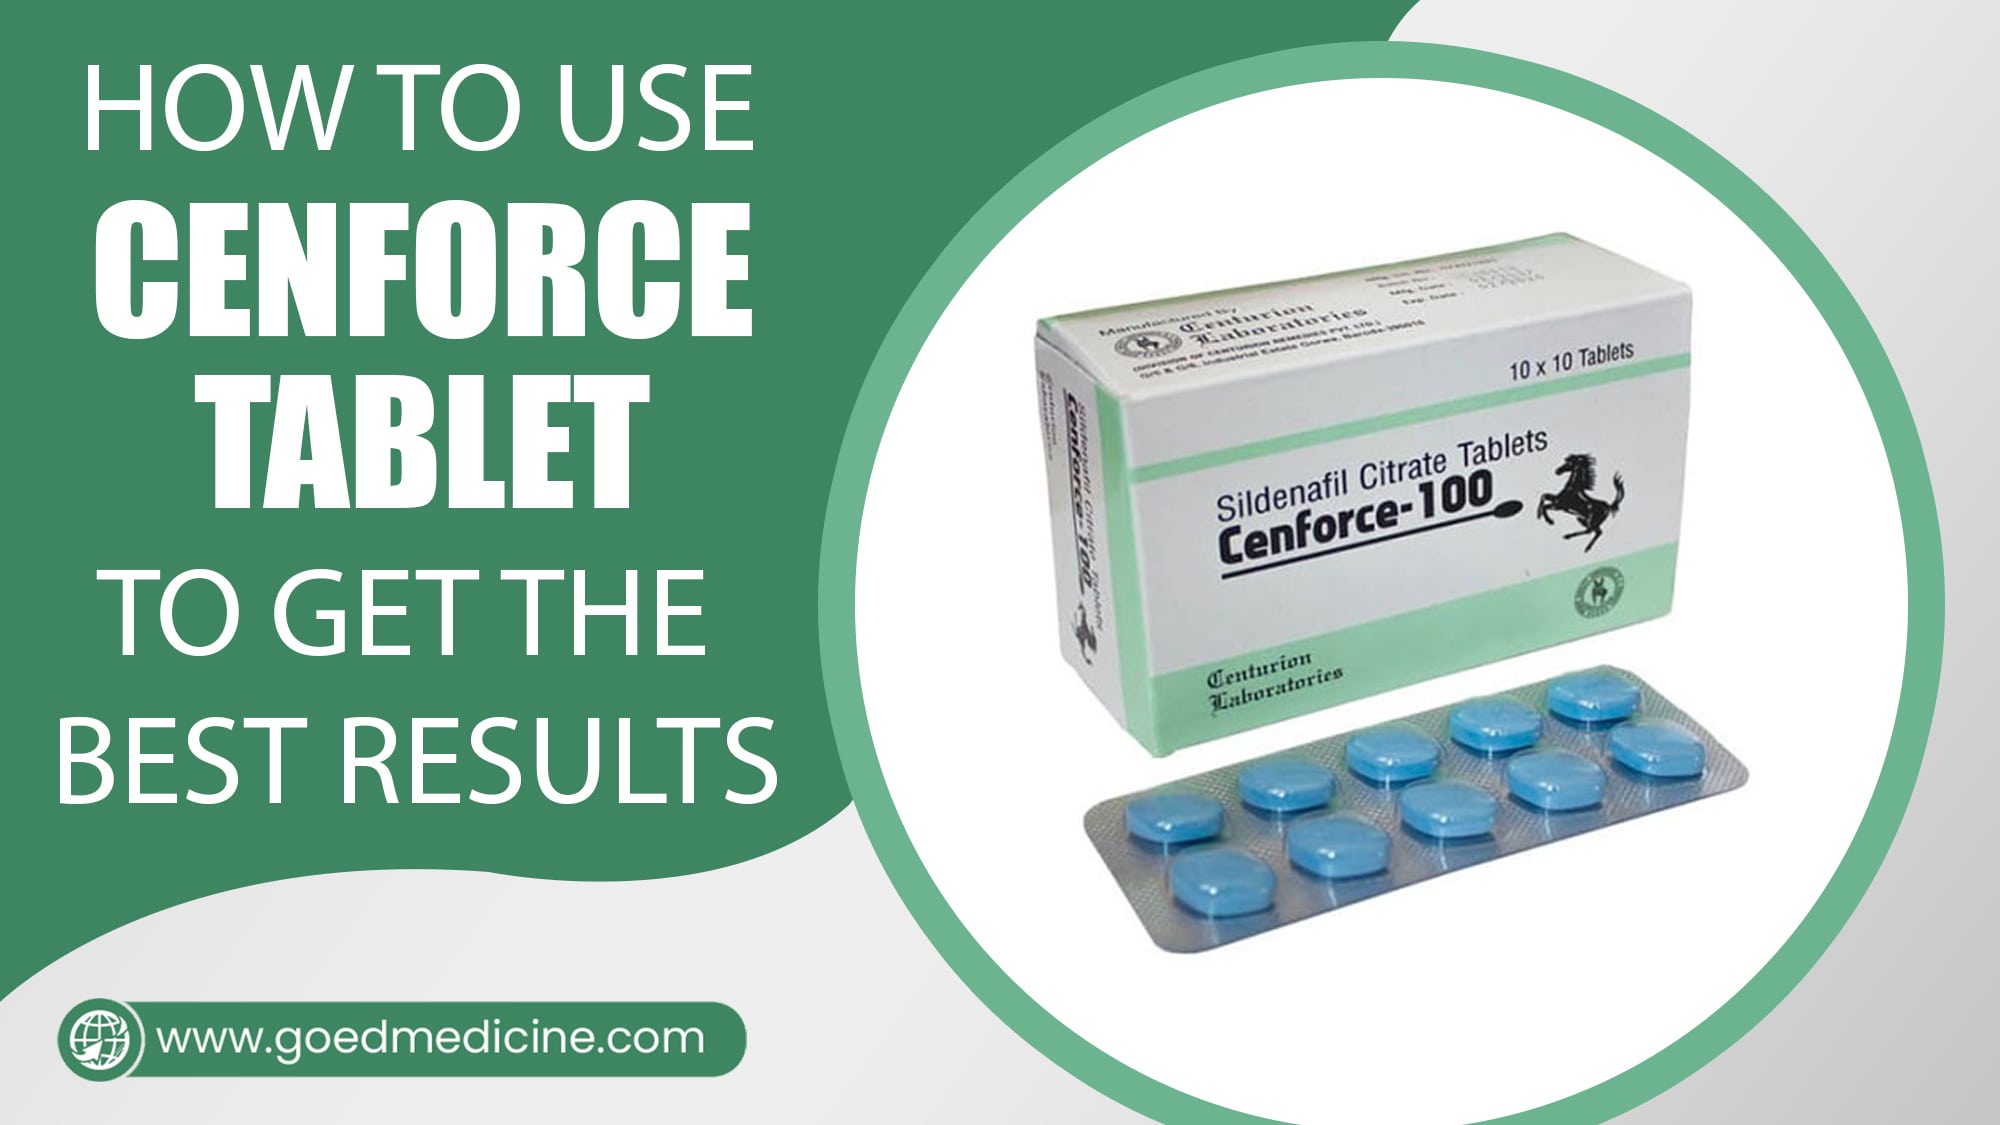 How to Use Cenforce Tablet to Get the Best Results